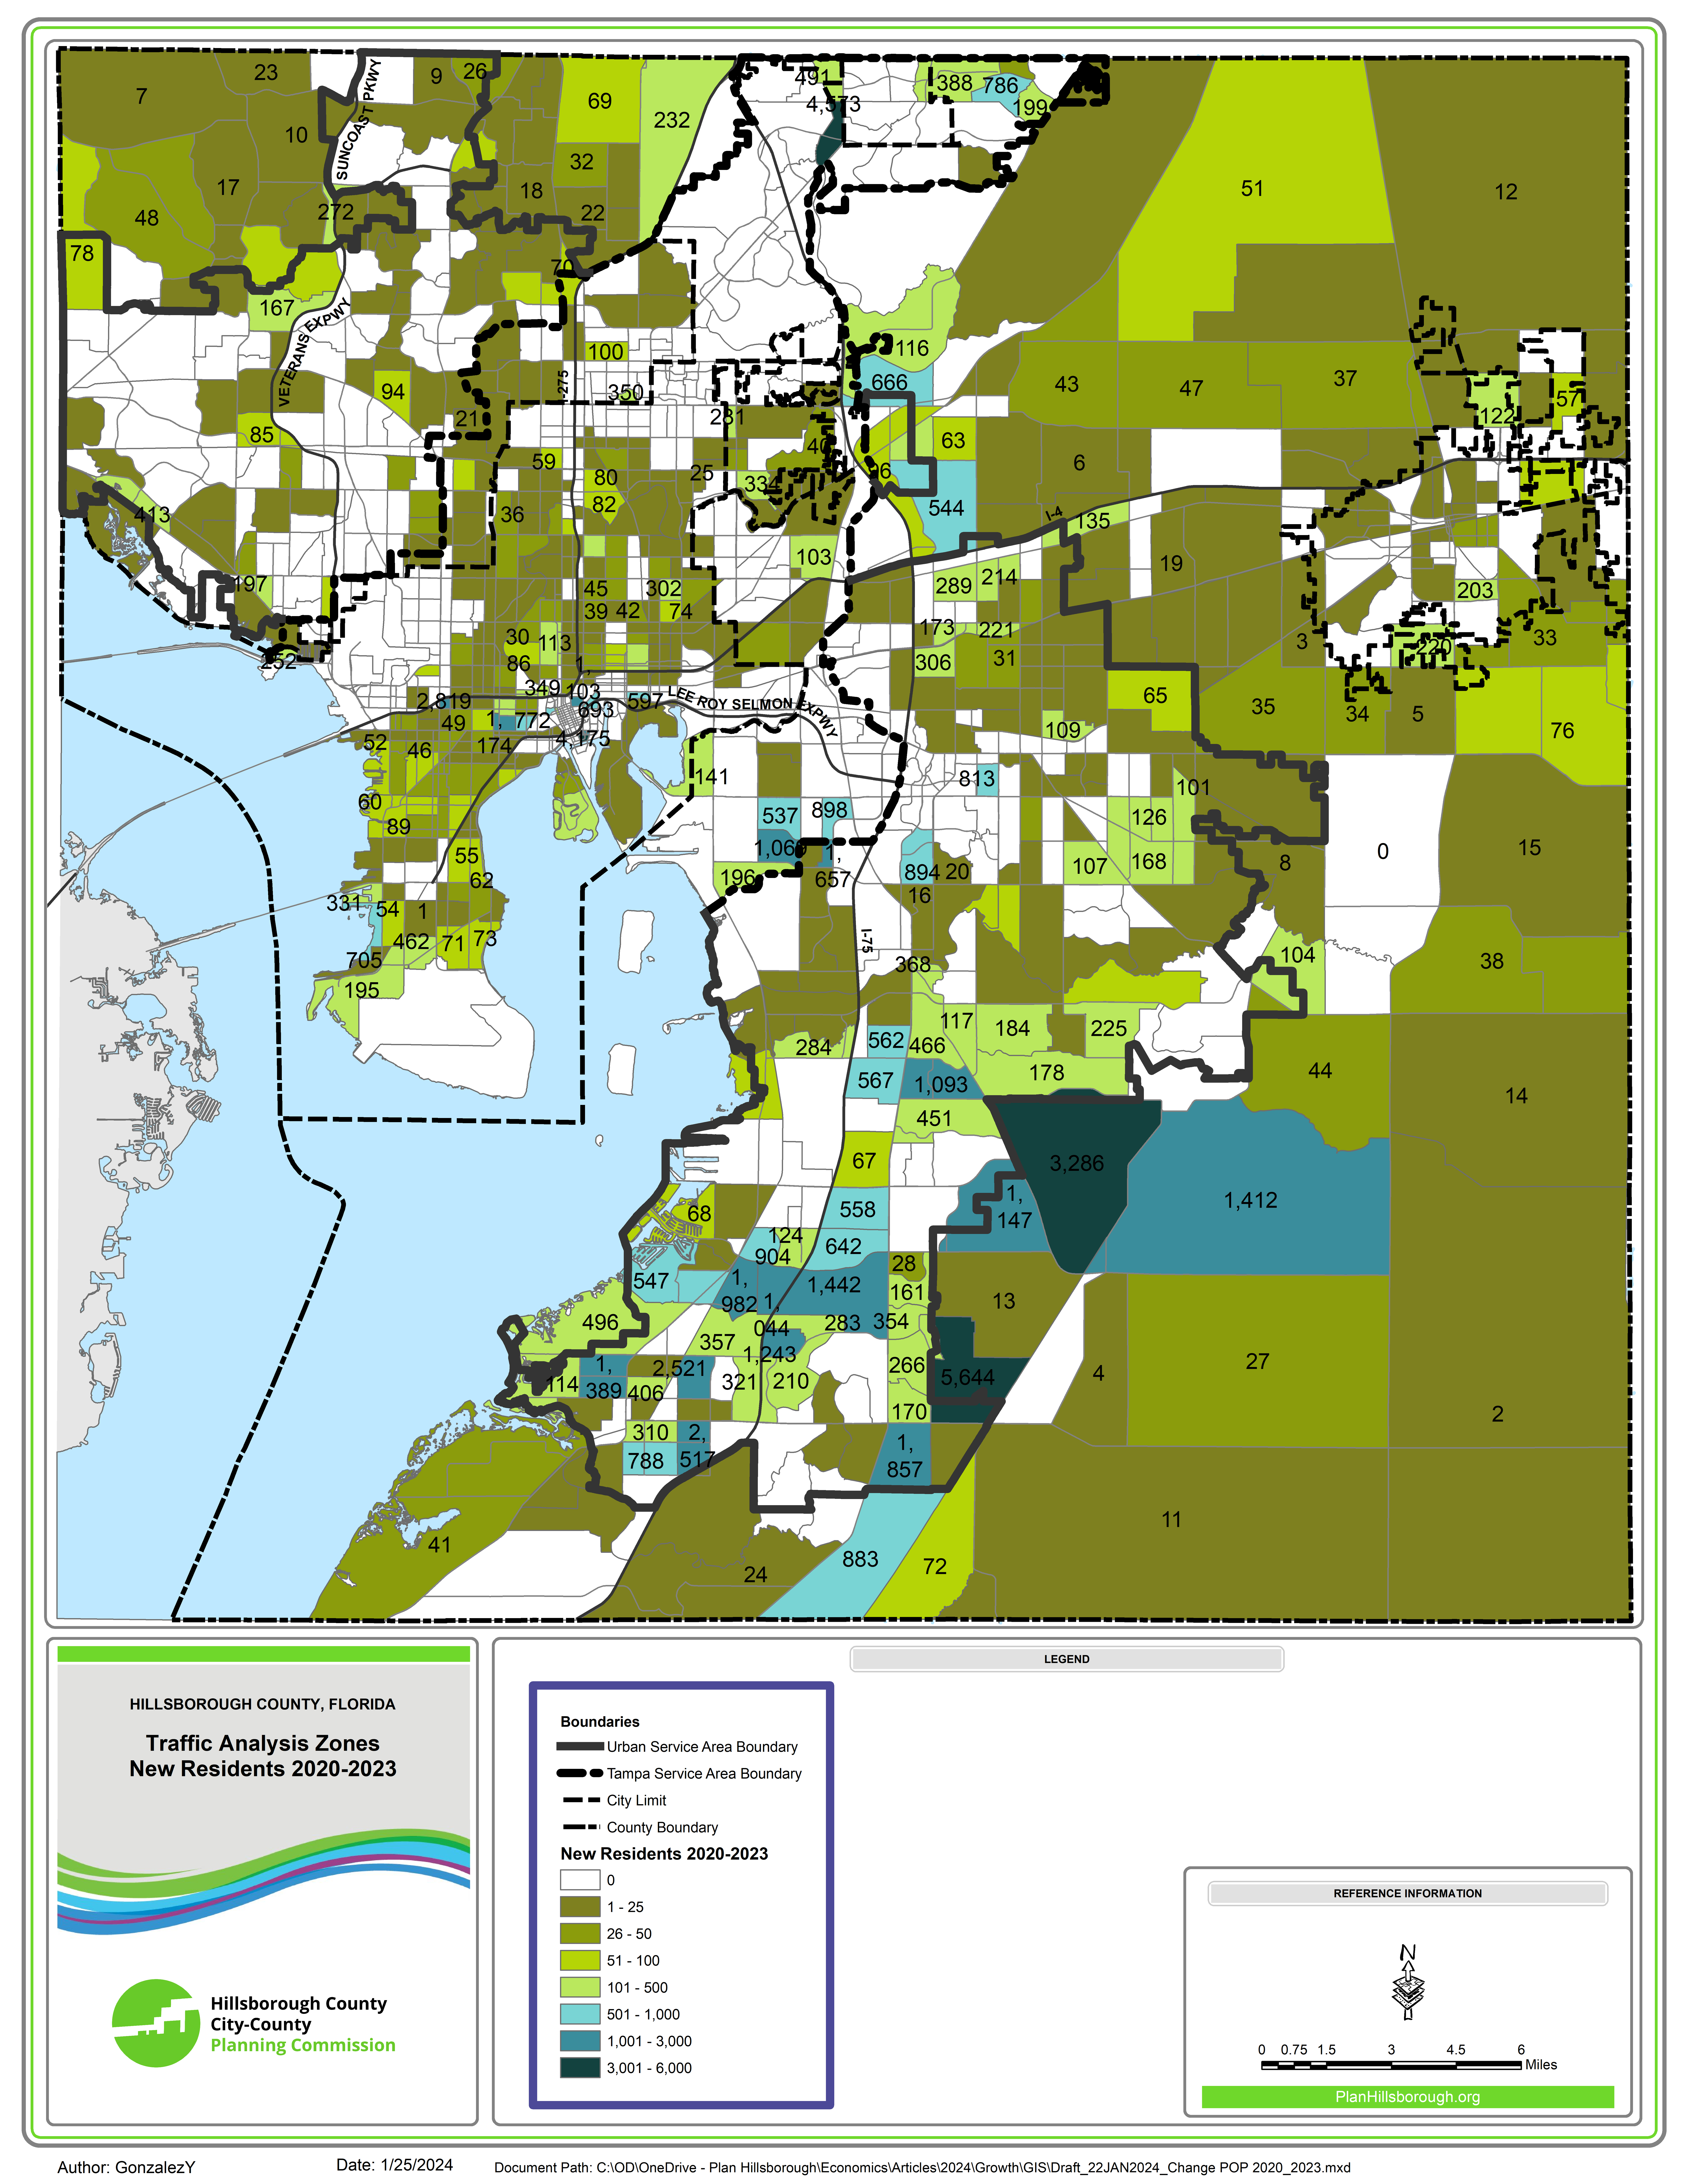 This map shows 2020-2023 change in population by Traffic Analysis Zones within Hillsborough County. Darker zones denote higher change in population.